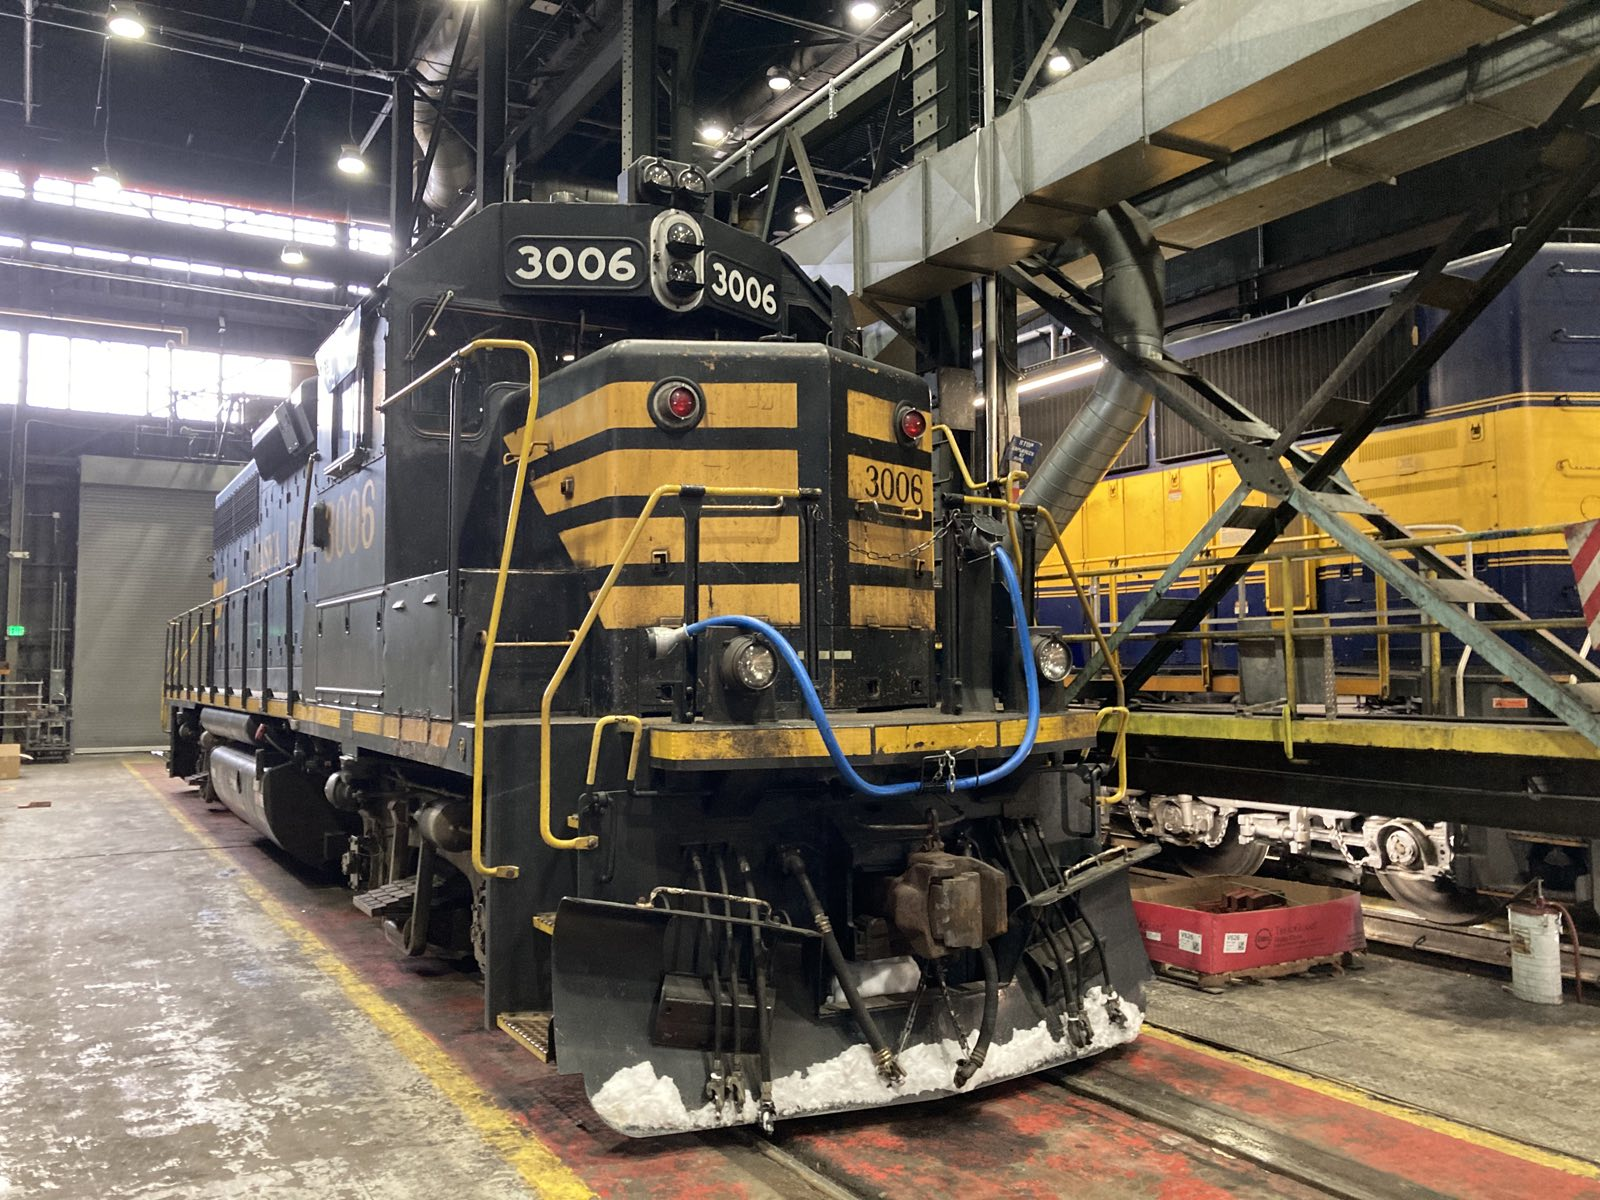 No. 3006 in the Anchorage shops